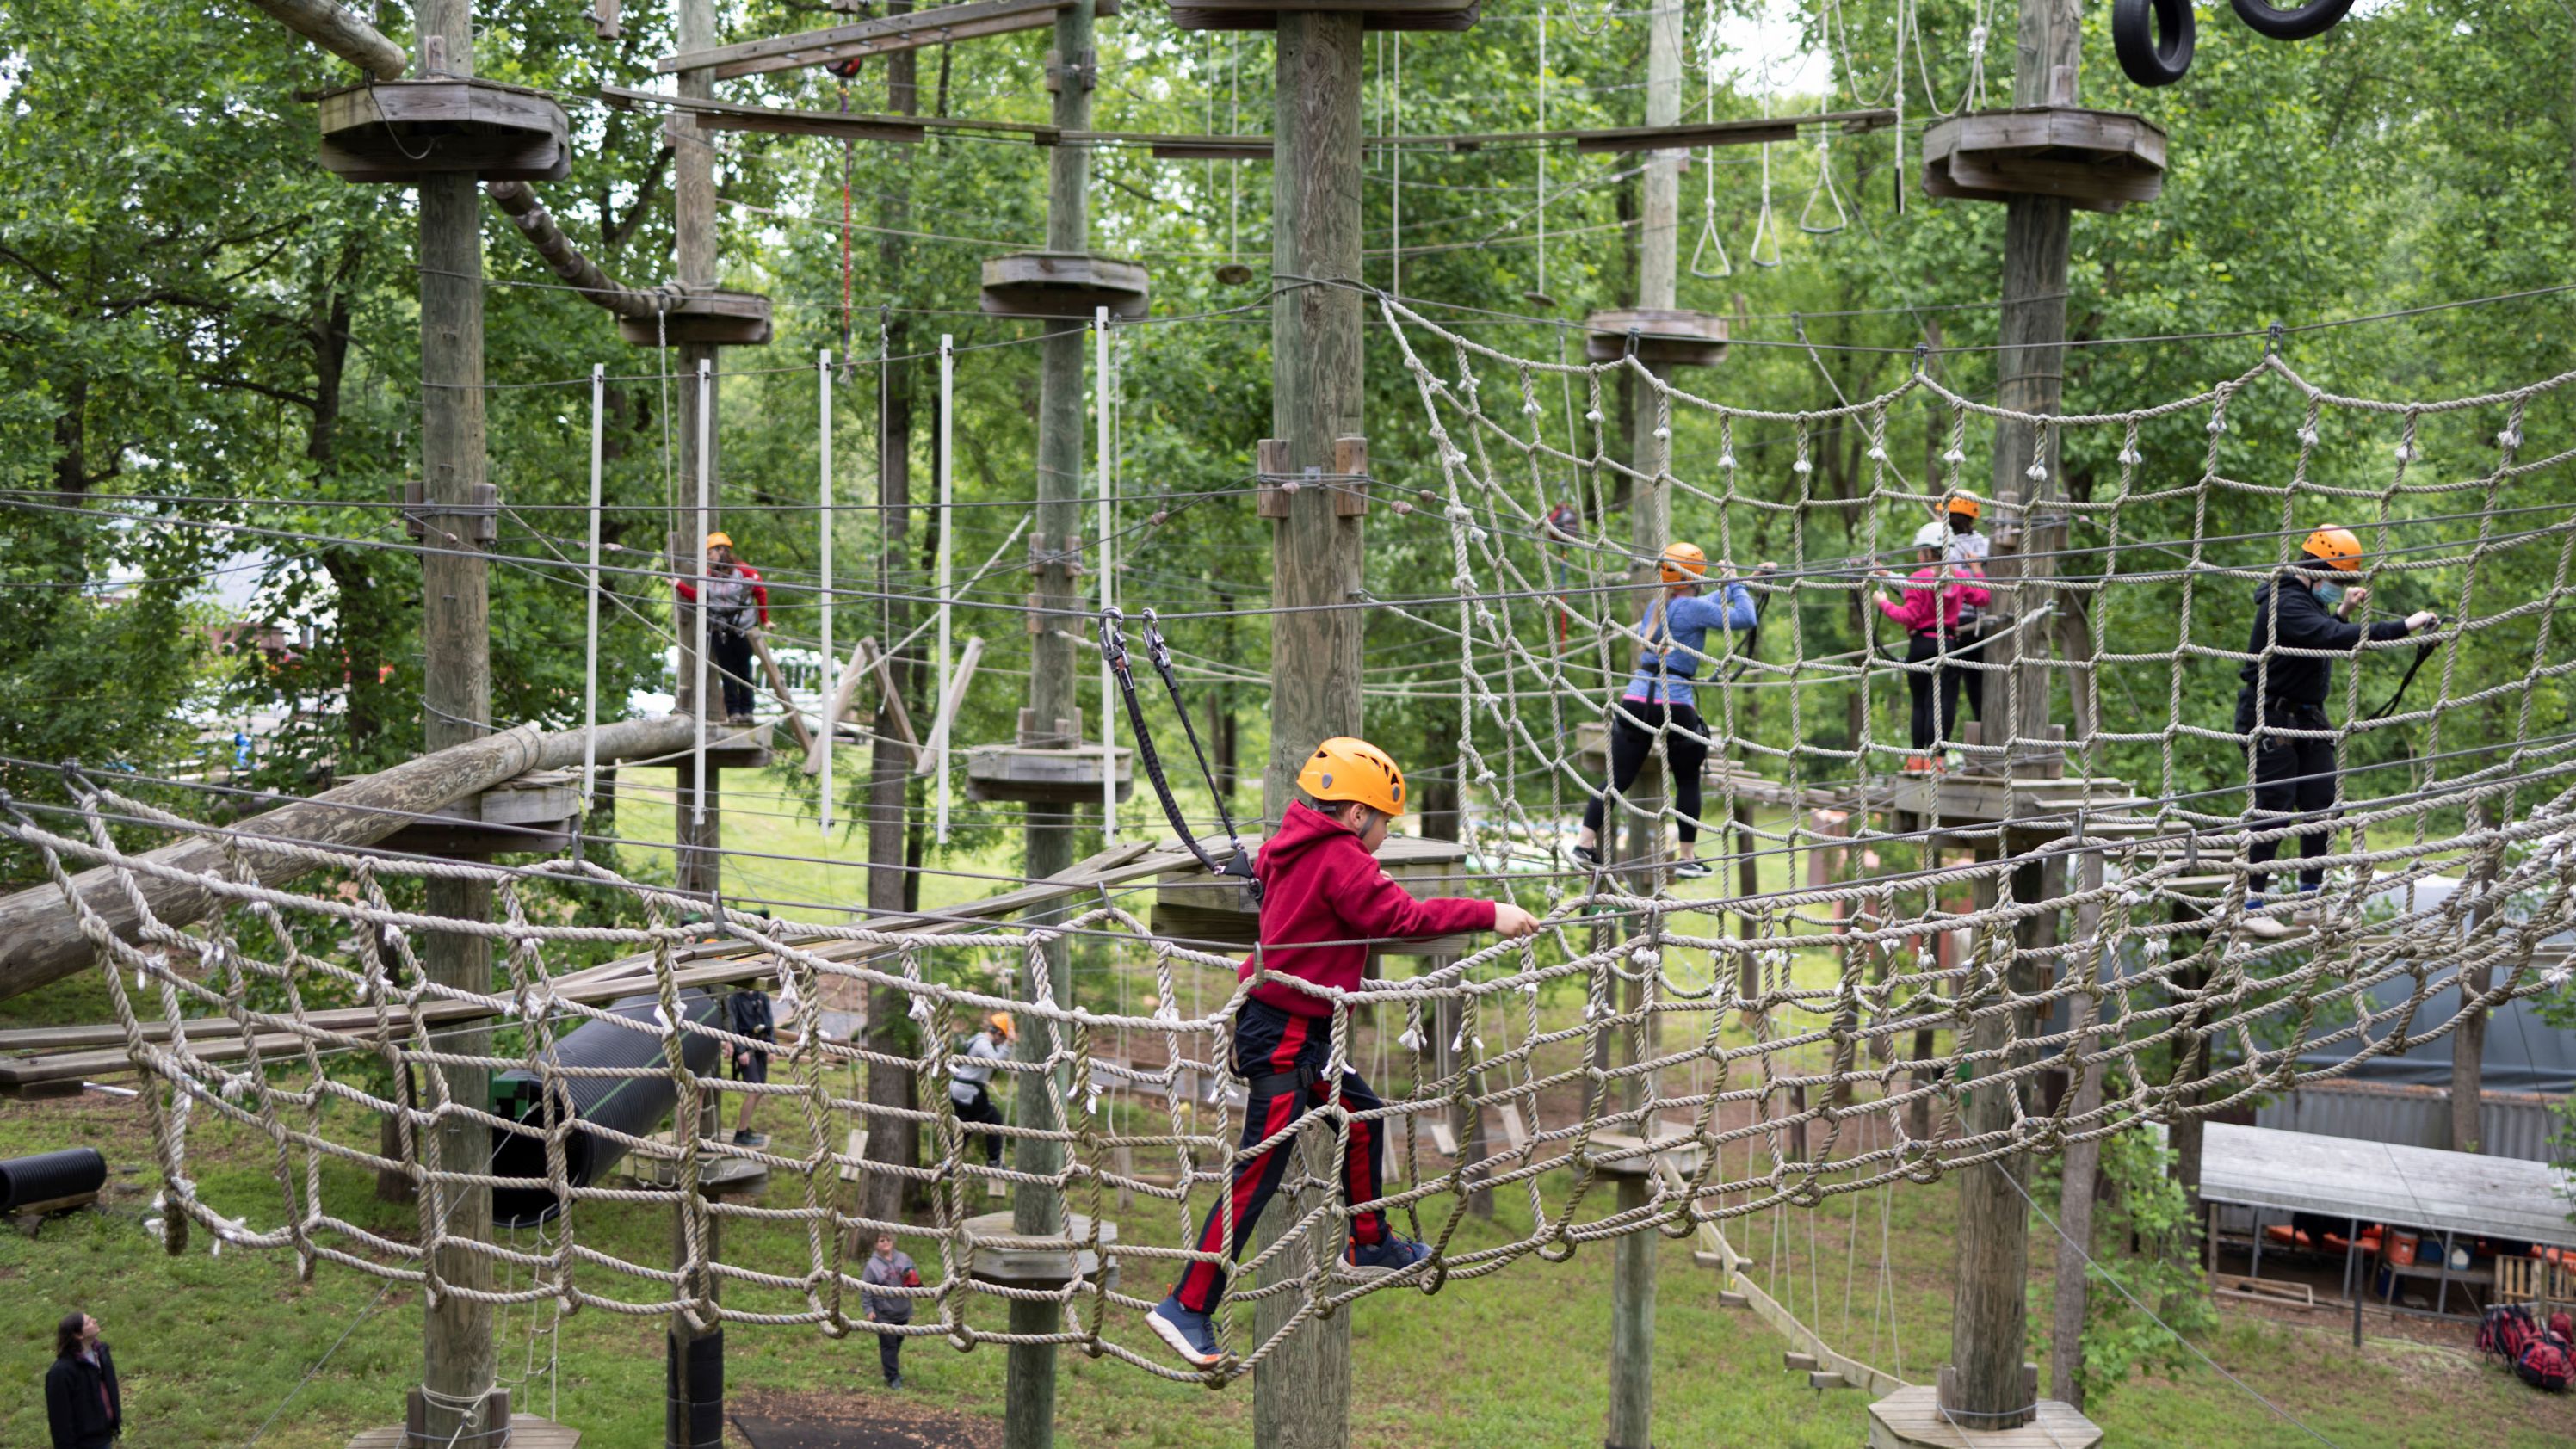 A boy makes his way through the aerial ropes course at Harpers Ferry Adventure Center in Hillsboro, Virginia, on Sunday.